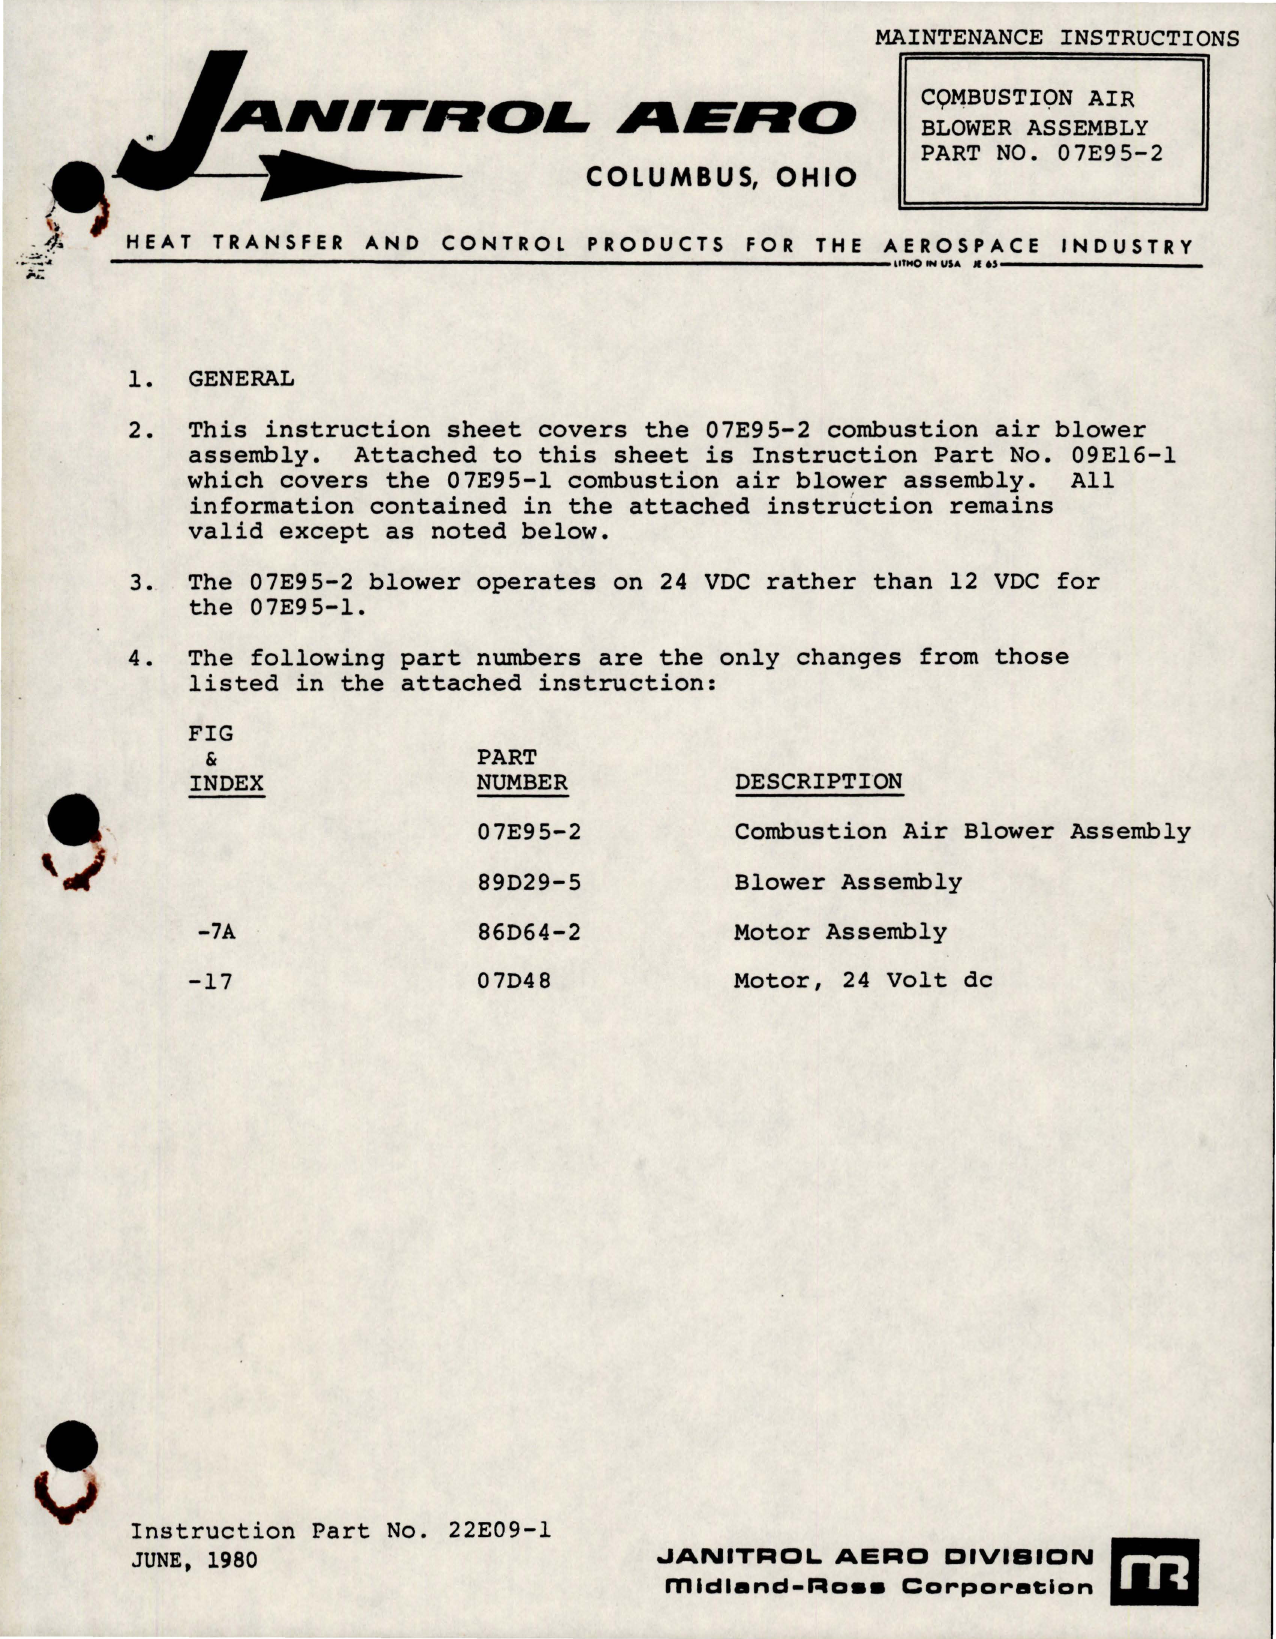 Sample page 1 from AirCorps Library document: Maintenance Instructions for Combustion Air Blower Assembly - Part 07E95-2